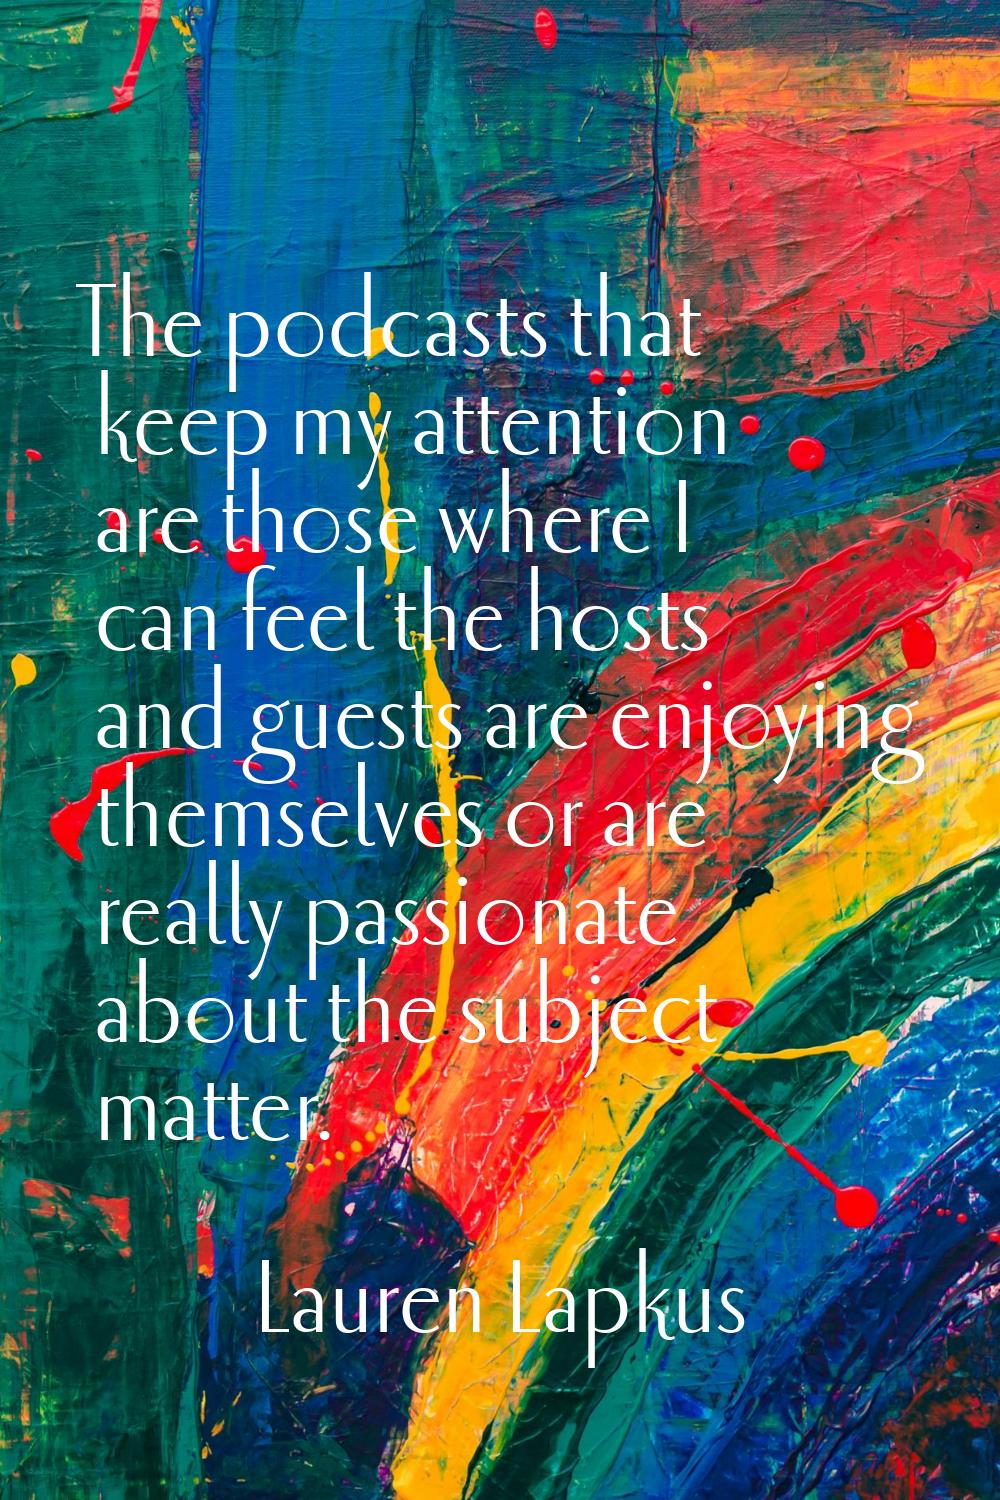 The podcasts that keep my attention are those where I can feel the hosts and guests are enjoying th